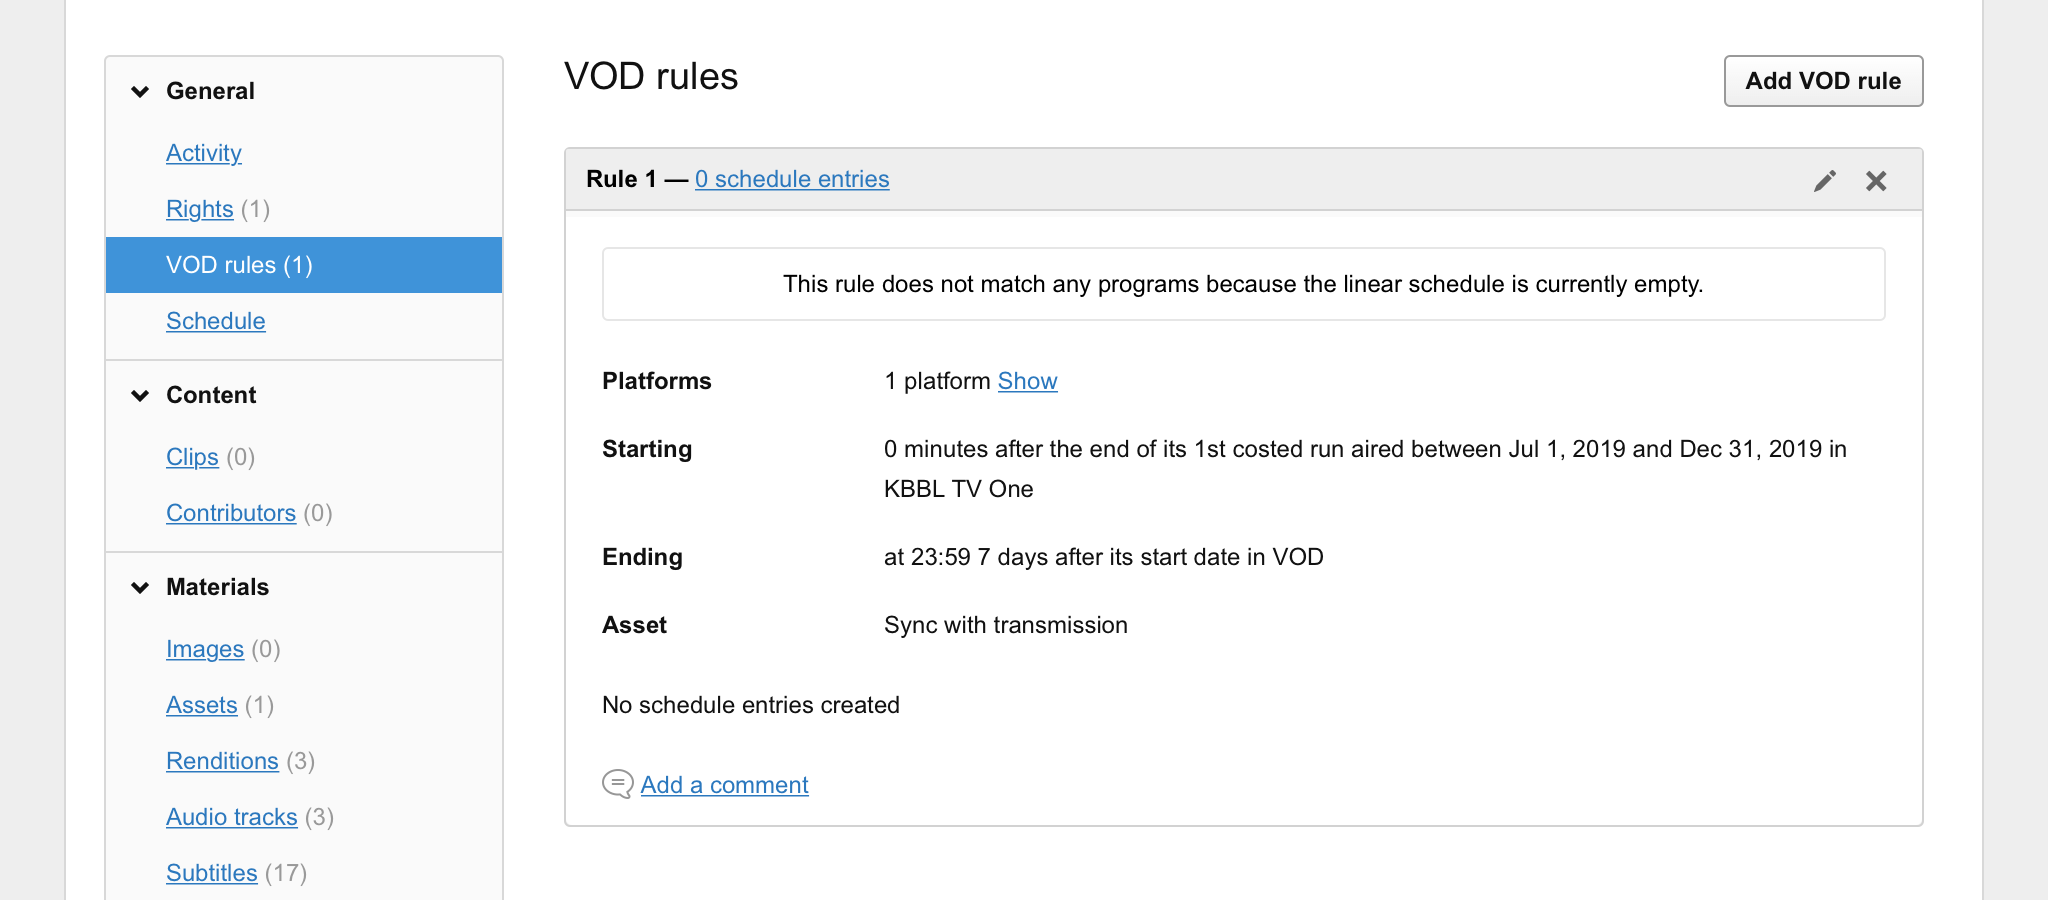 VOD rules